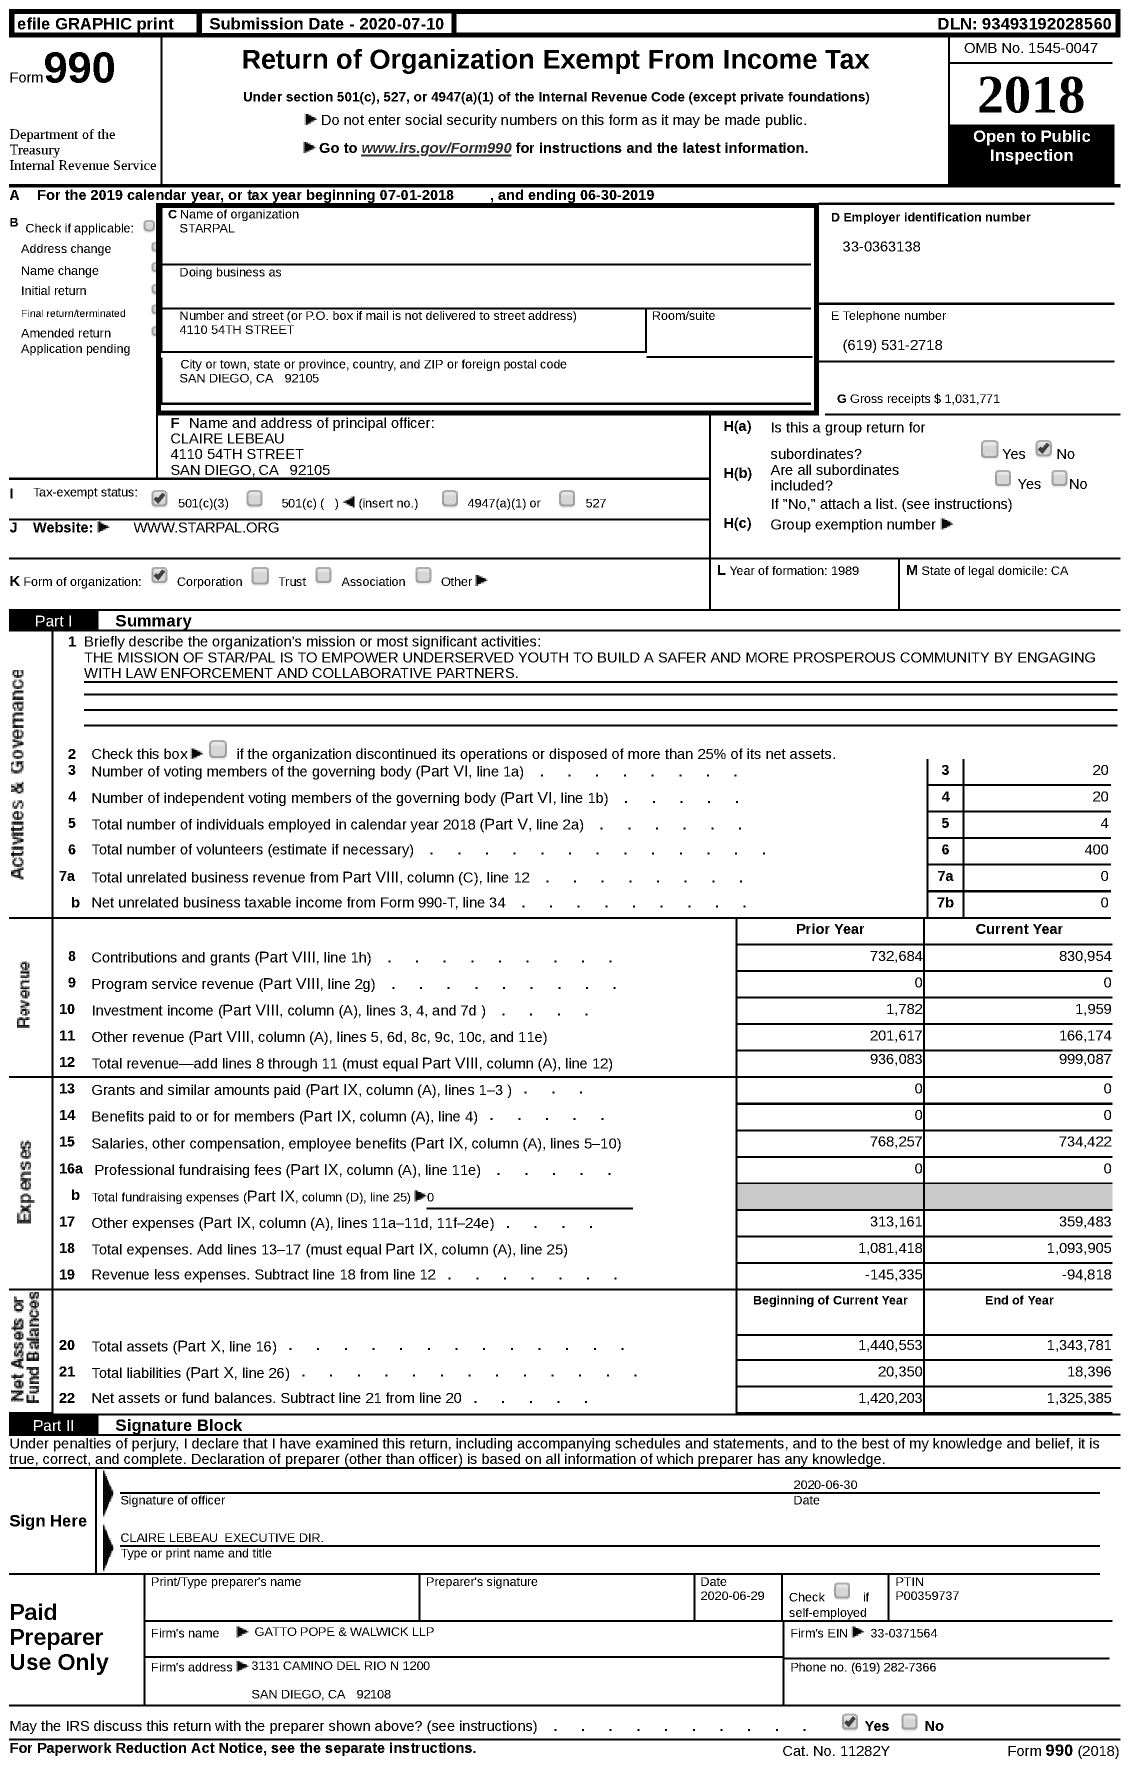 Image of first page of 2018 Form 990 for Star Pal